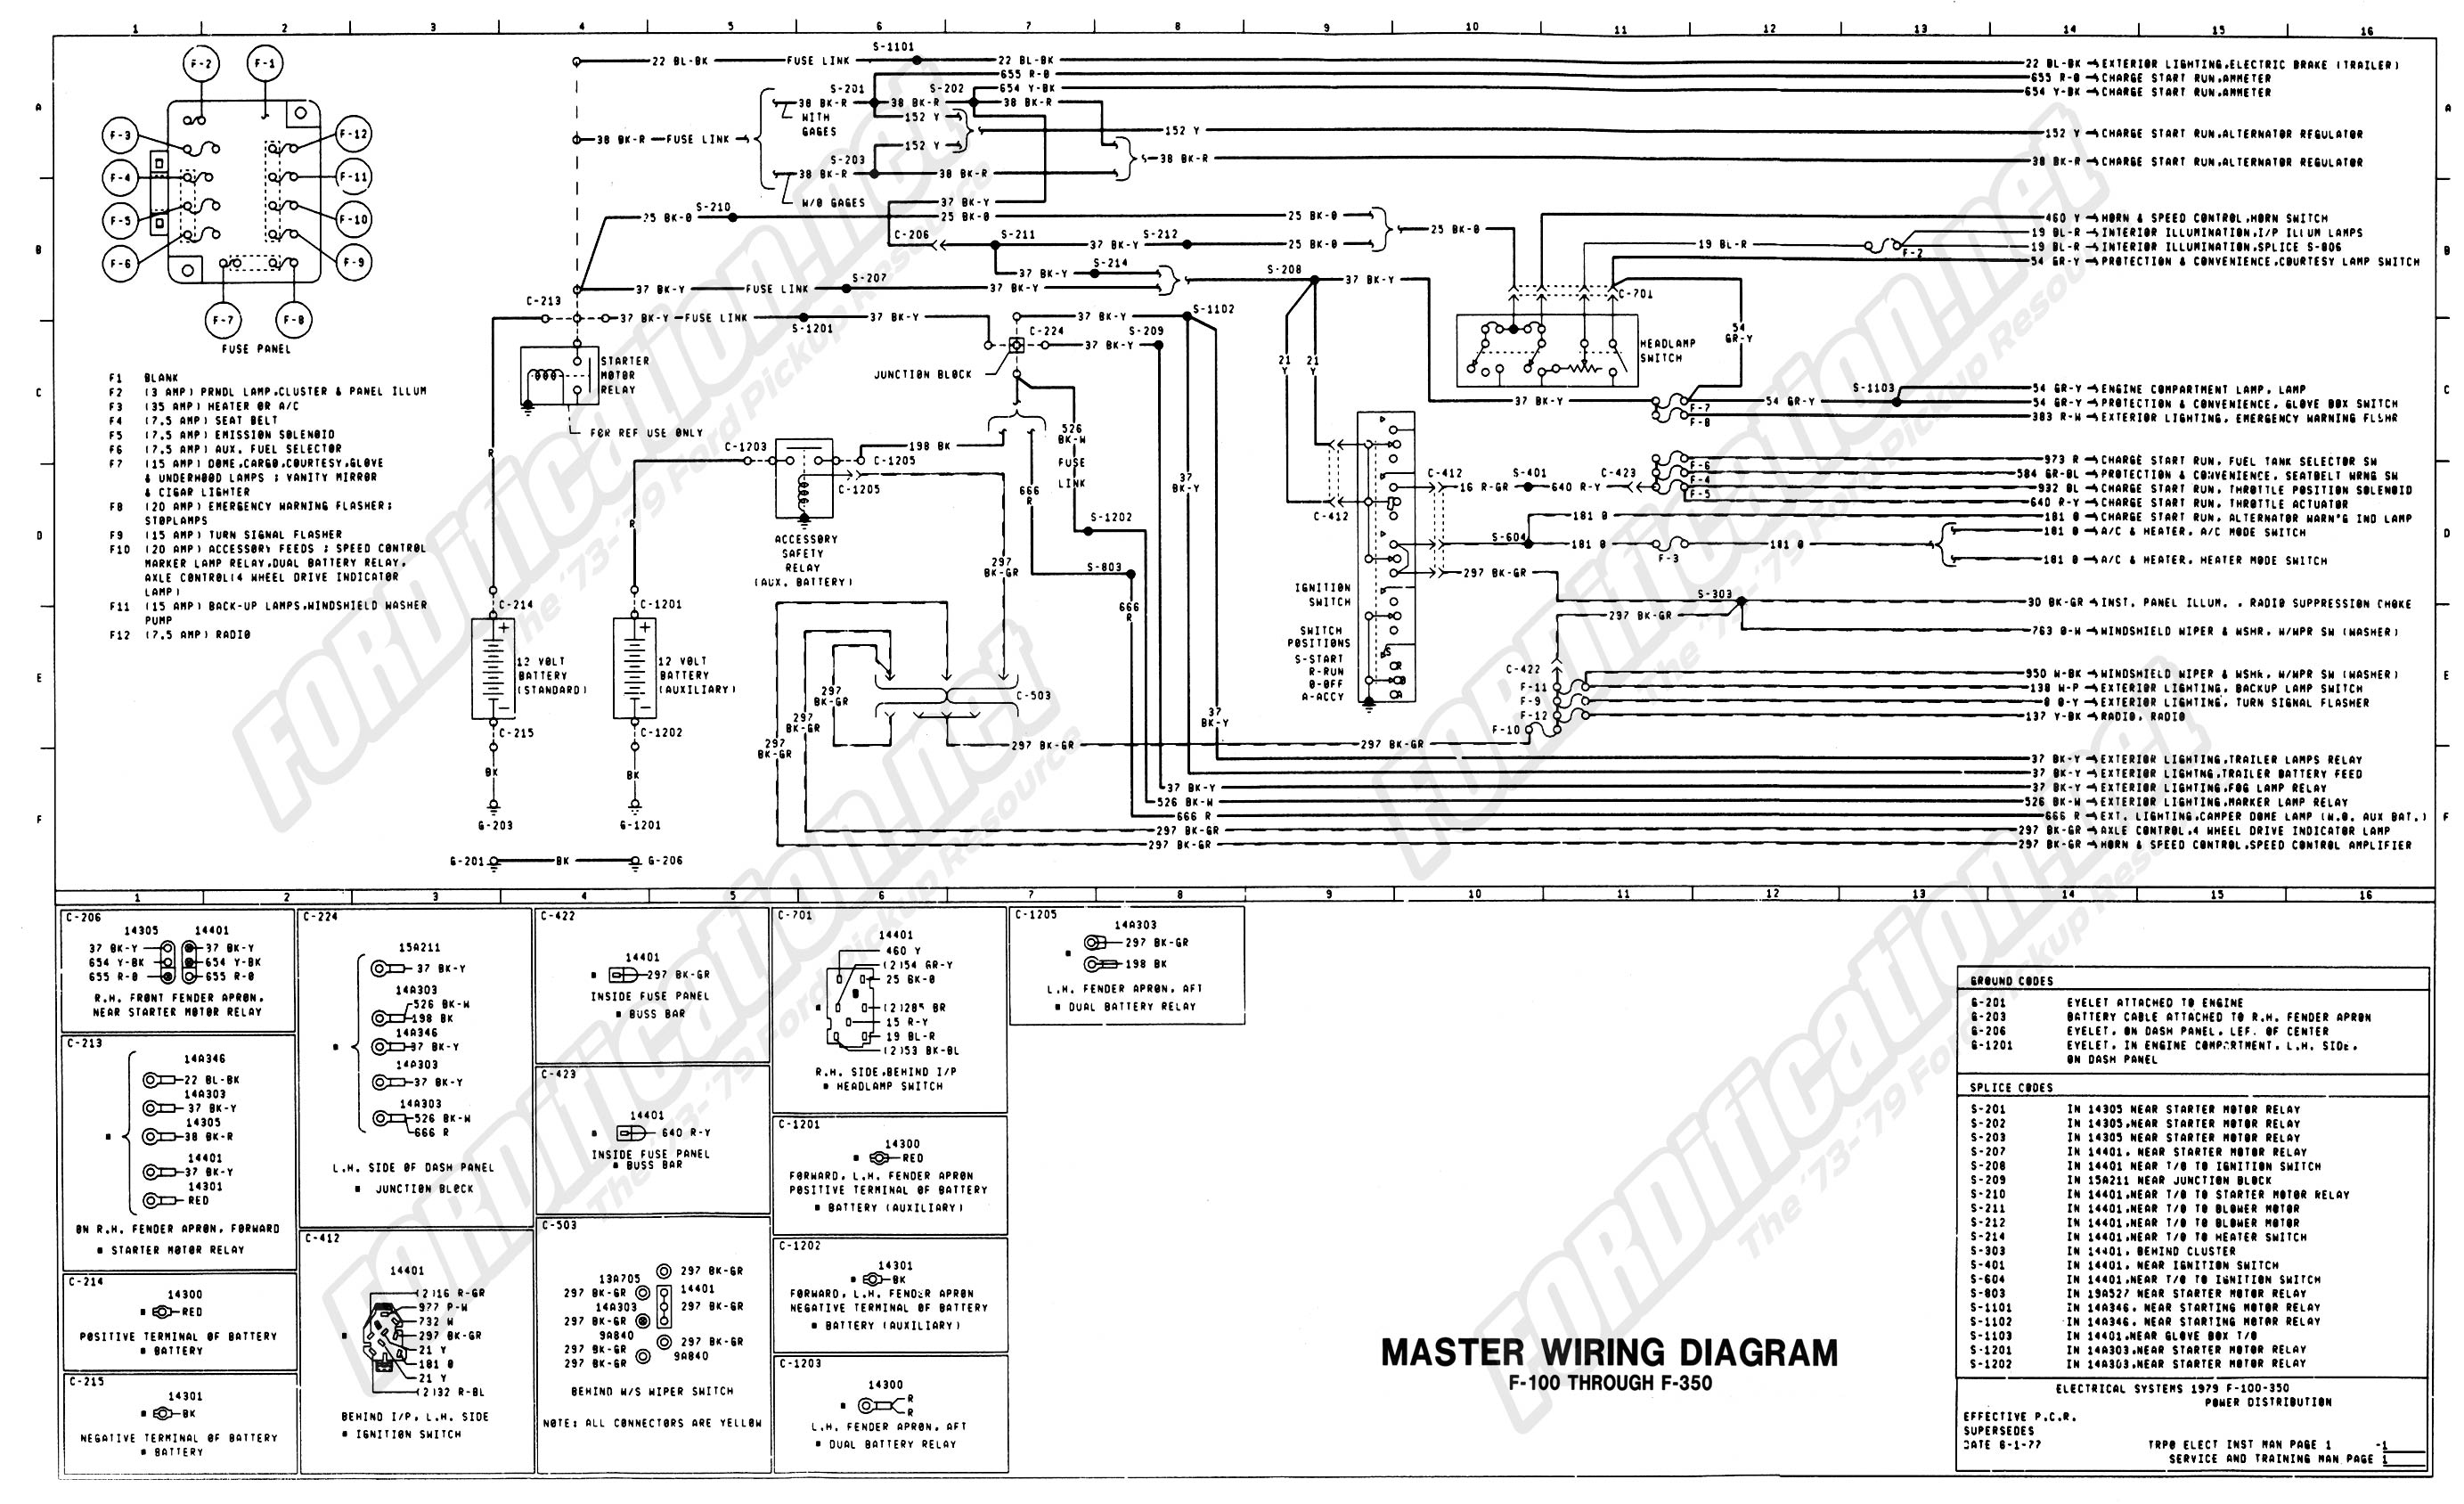 1979 Ford courier wiring diagram #2